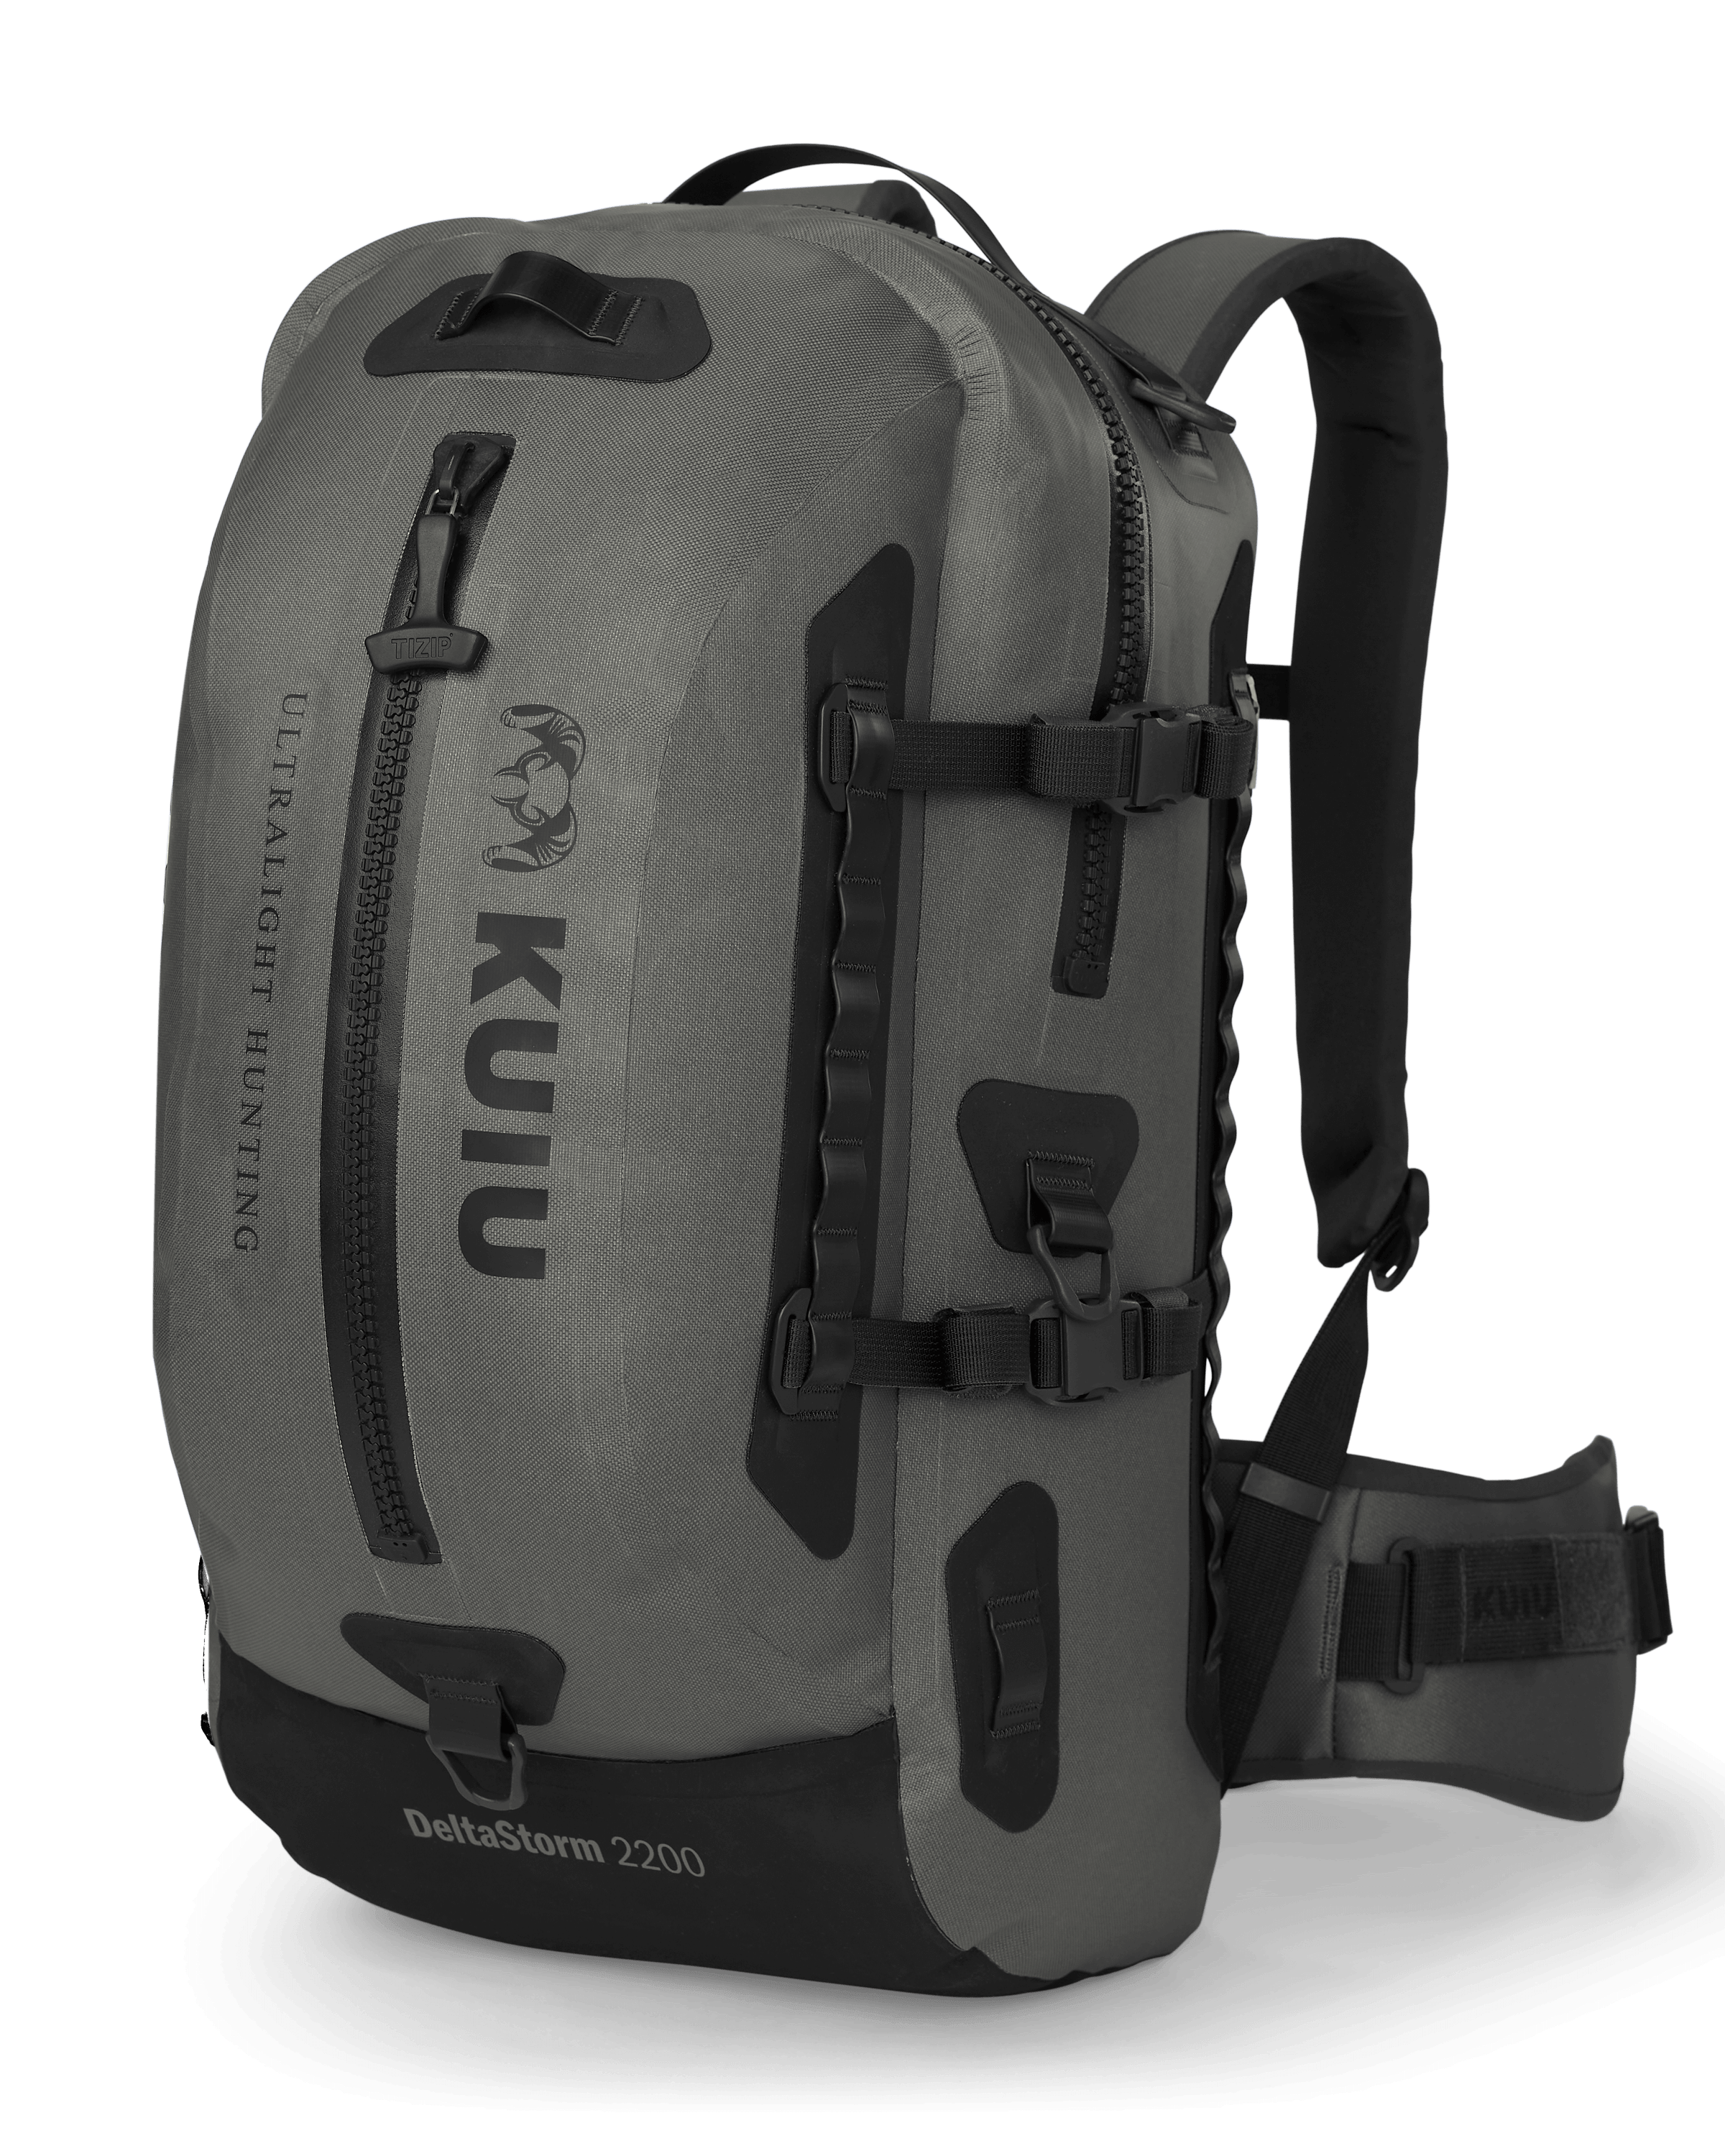 KUIU DeltaStorm 2200 Day Bag Pack Submersible Backpack in Stone Hunting Pack